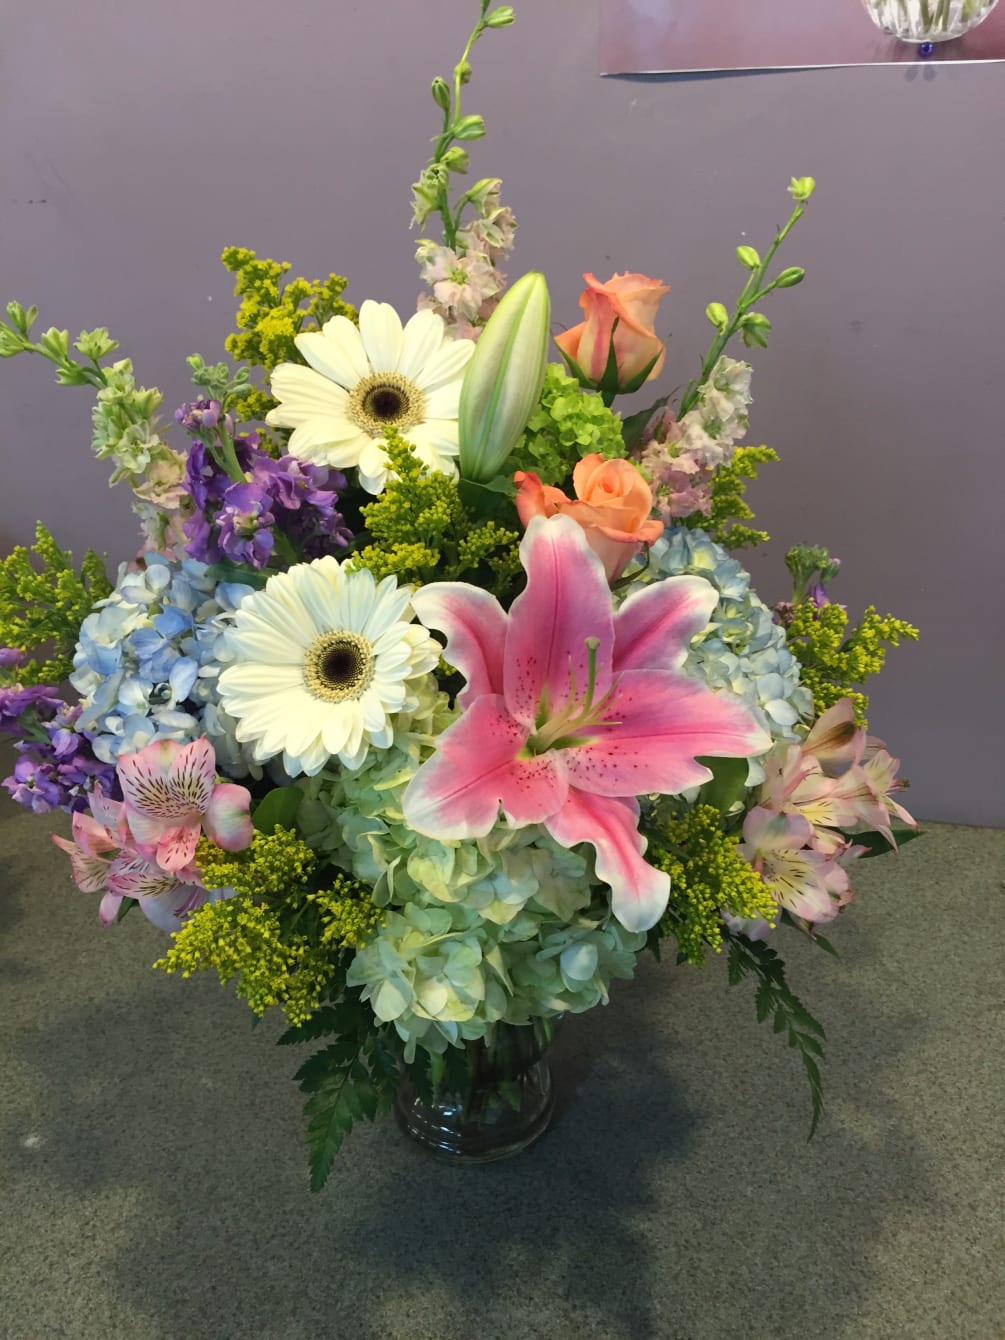 A vase full of the favorites such as roses, hydrangea, lilies, gerbera